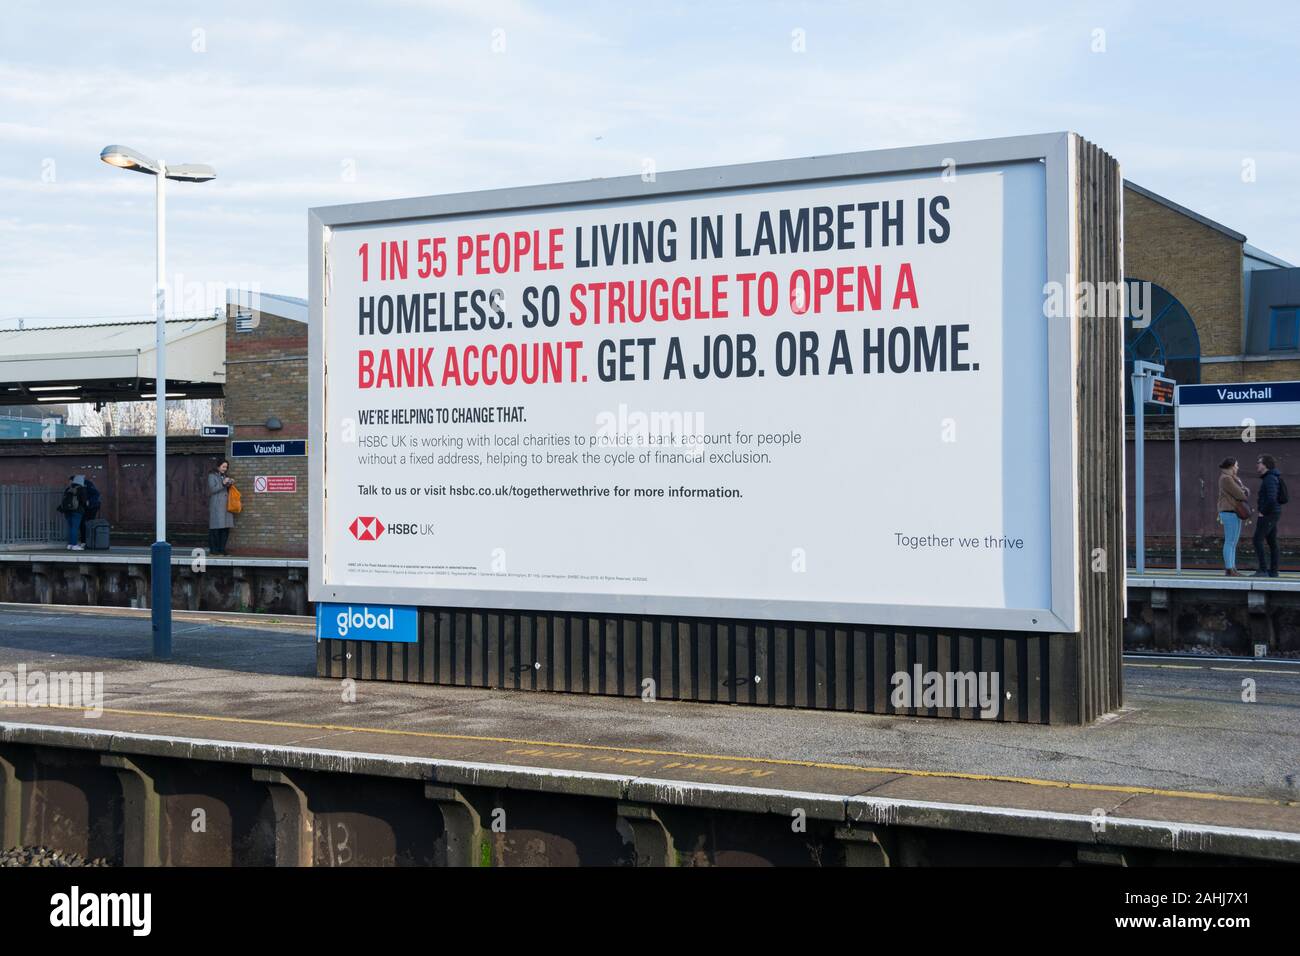 An HSBC no fixed abode initiative to provide bank accounts to homeless people Stock Photo